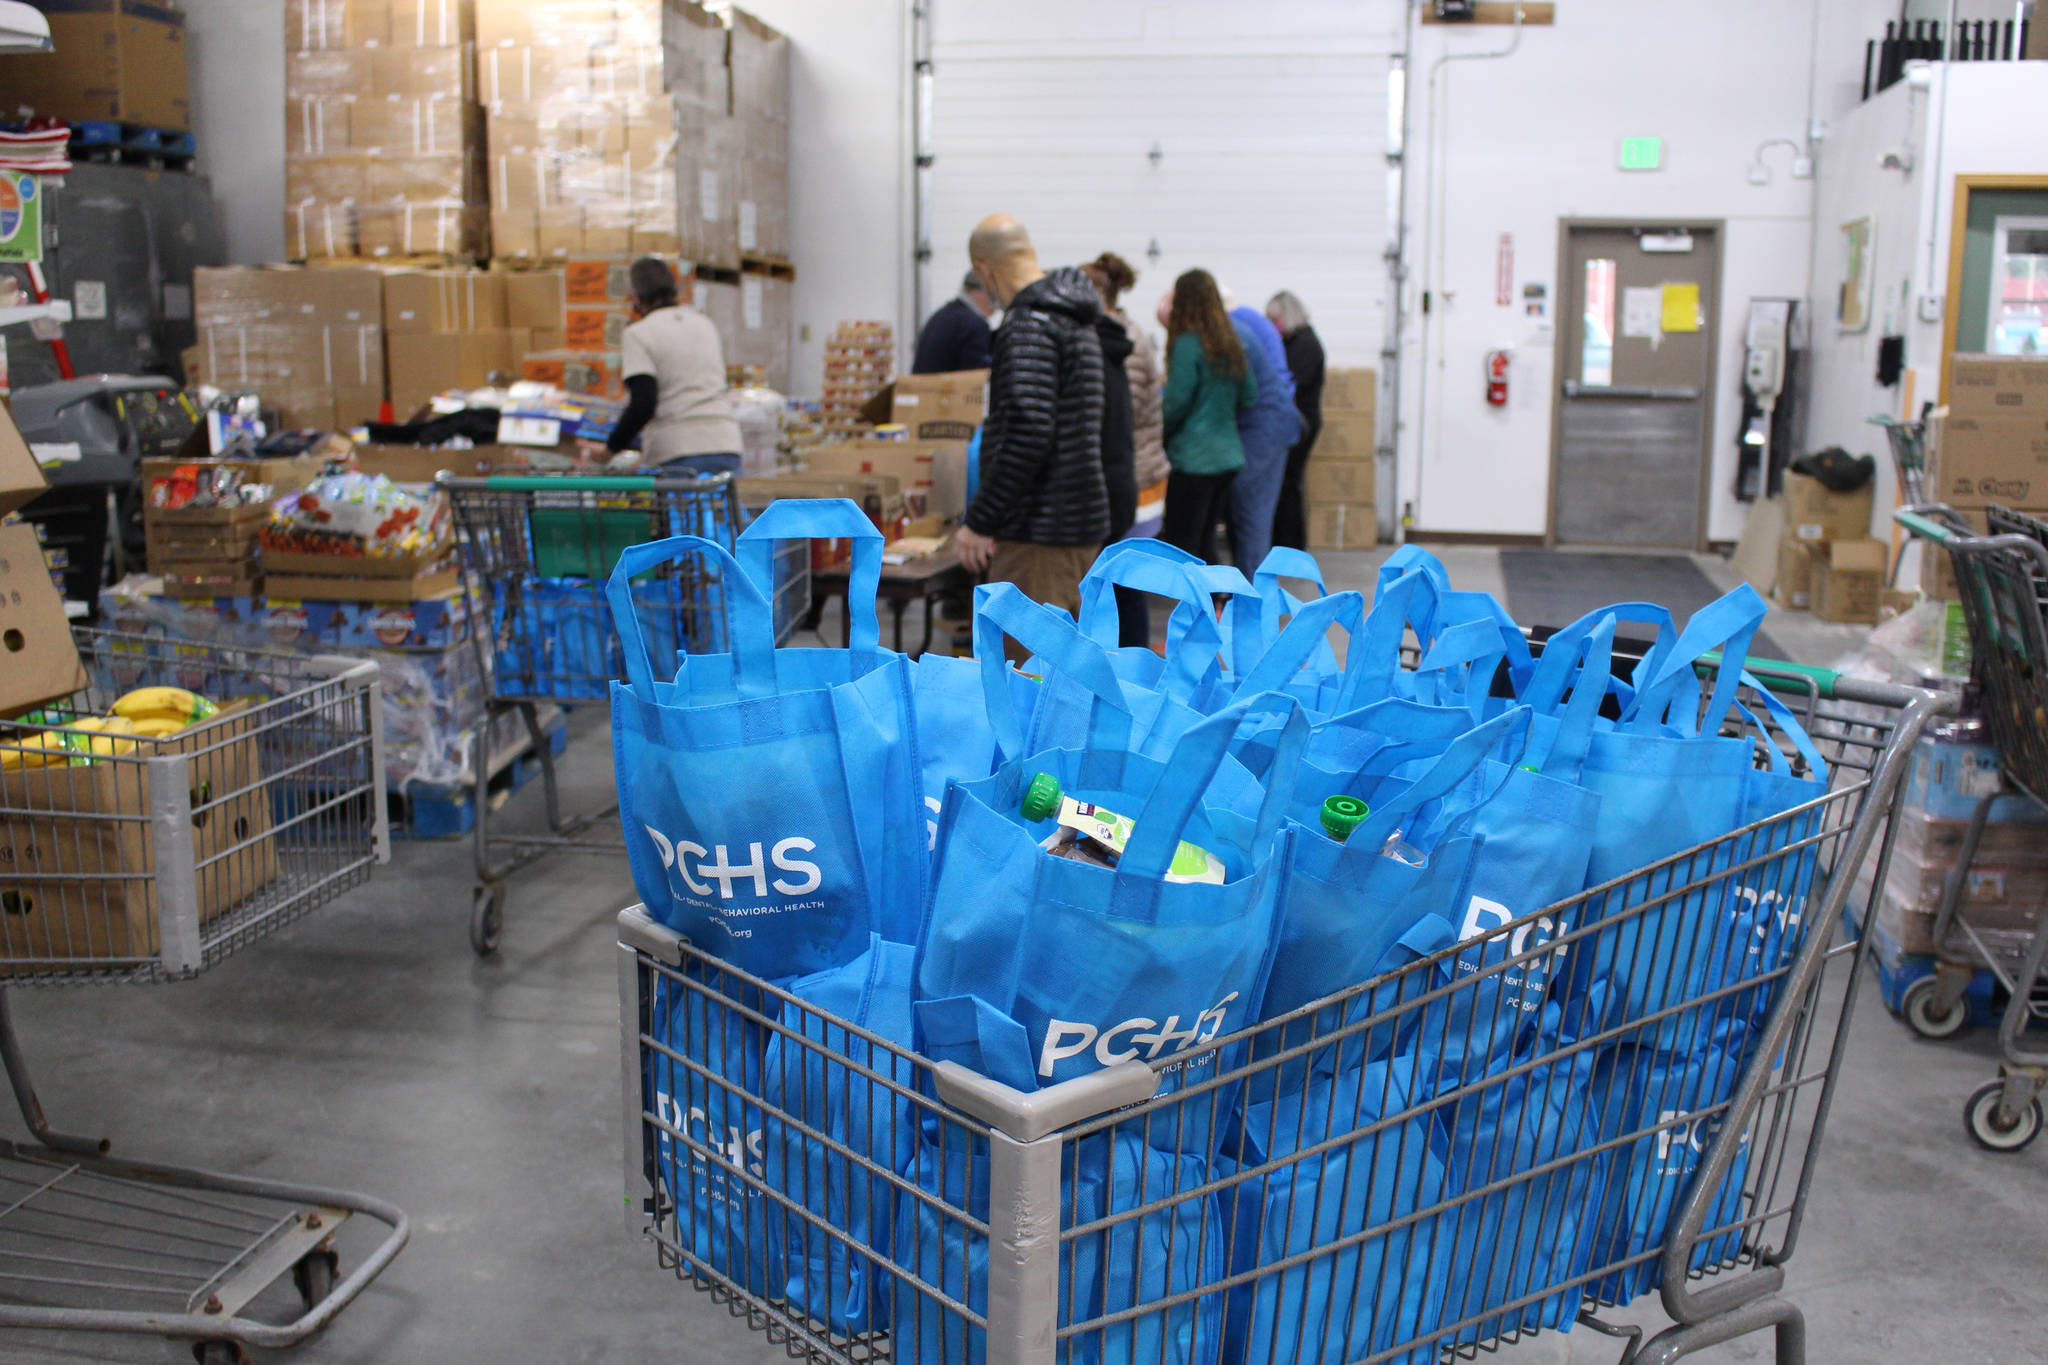 Bags of shelf-stable food to be distributed for Project Homeless Connect are seen here at the Kenai Peninsula Food Bank in Soldotna, Alaska on Jan. 23, 2021. (Photo by Brian Mazurek/Peninsula Clarion)